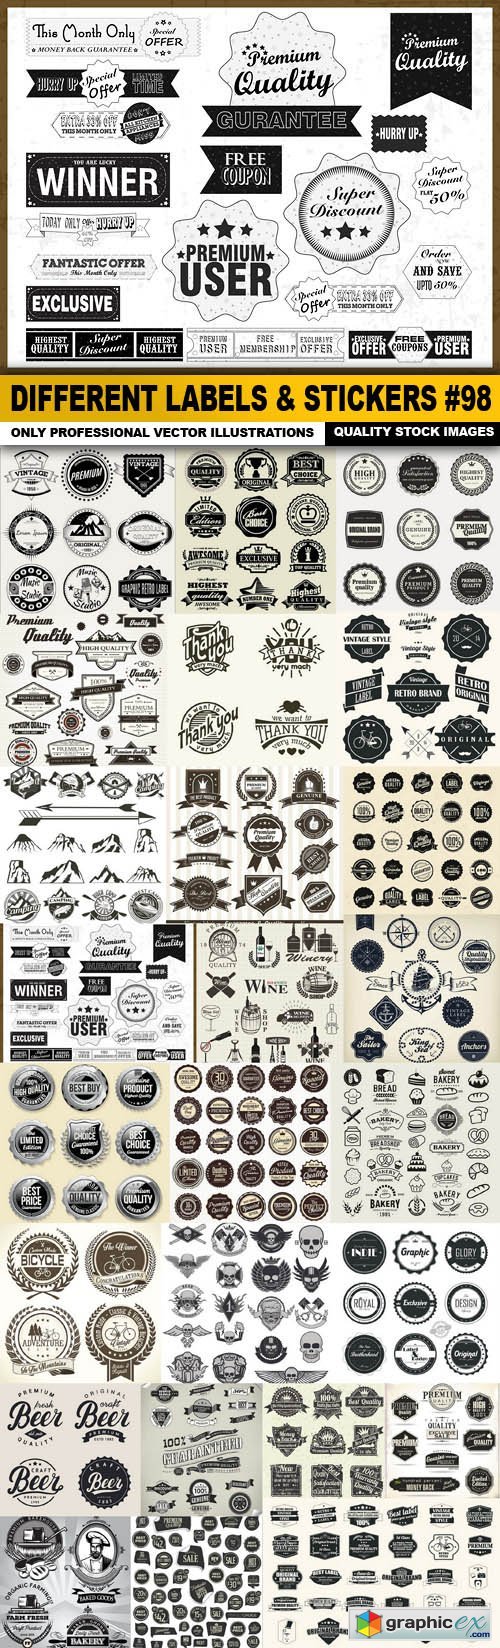 Different Labels & Stickers #98